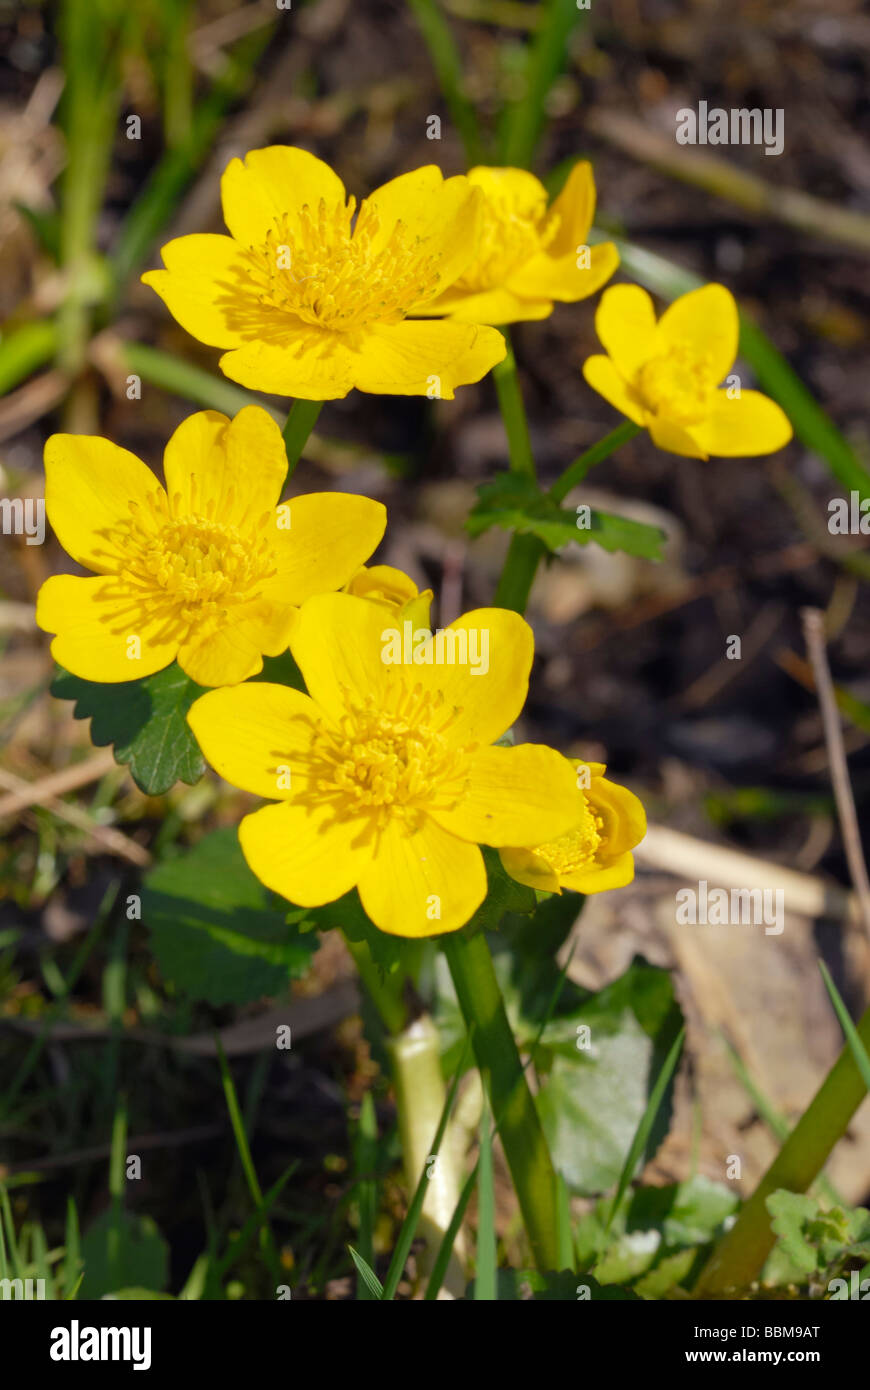 Kingcup or Marsh Marigold (Caltha palustris), with yellow flowers Stock Photo